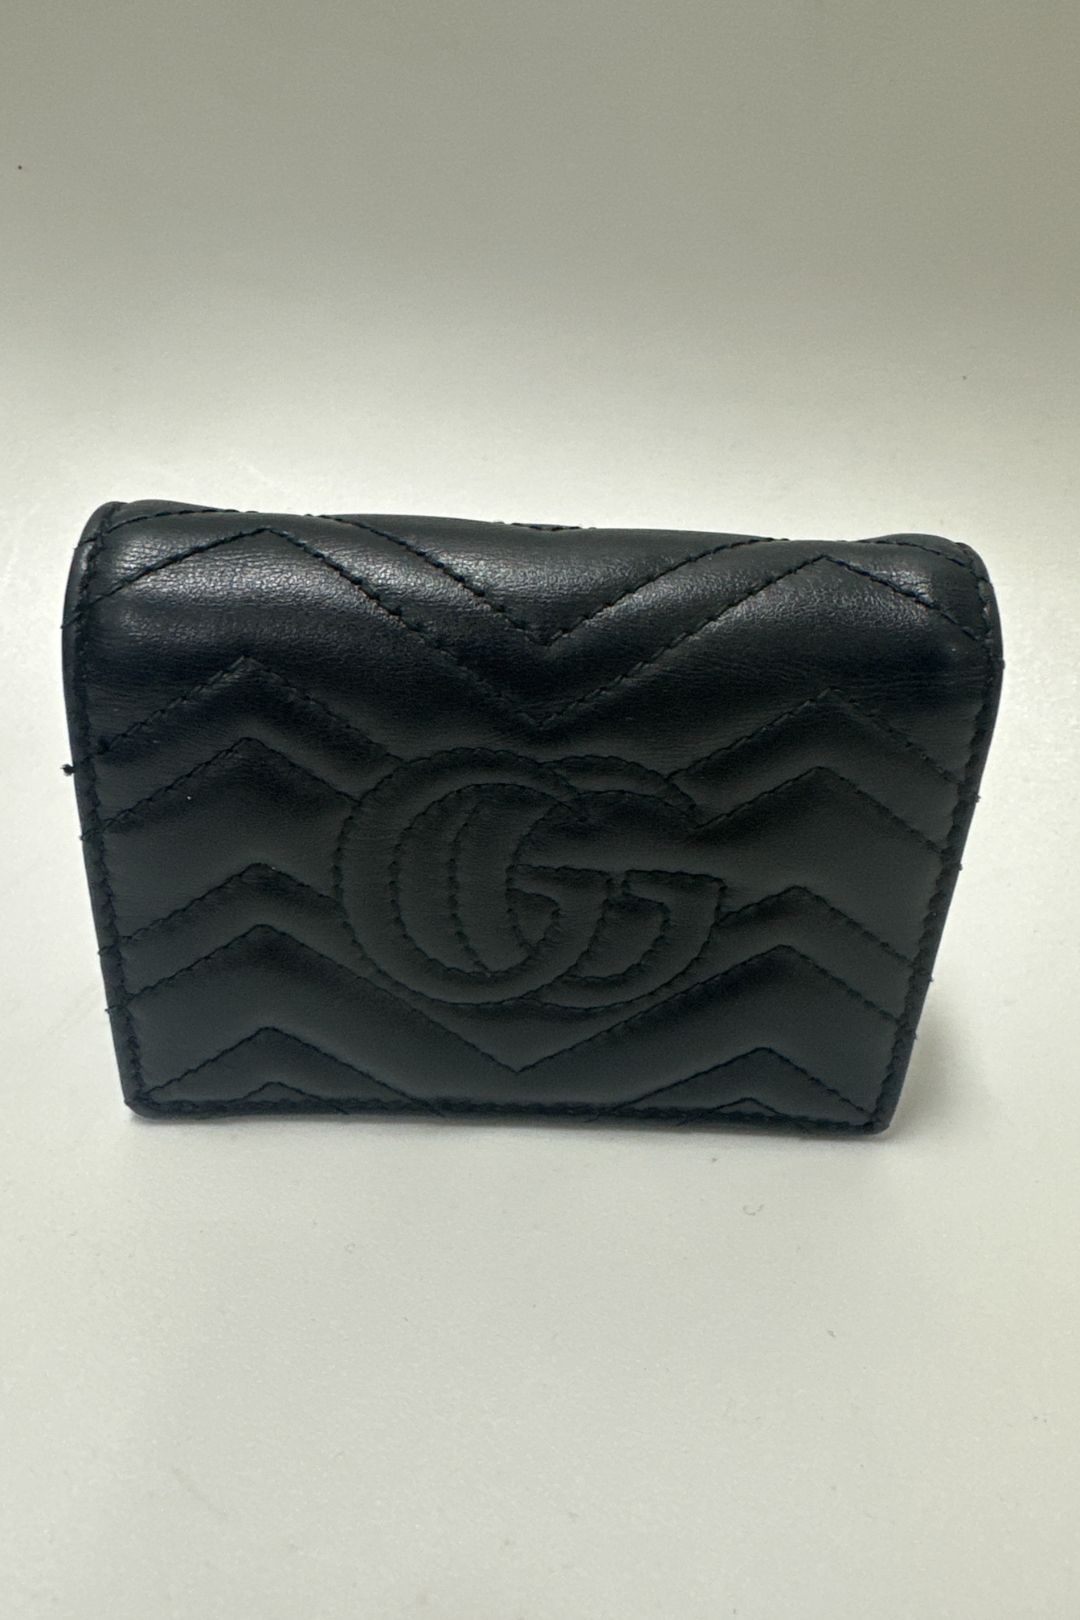 Gucci Marmont Card Holder Review 